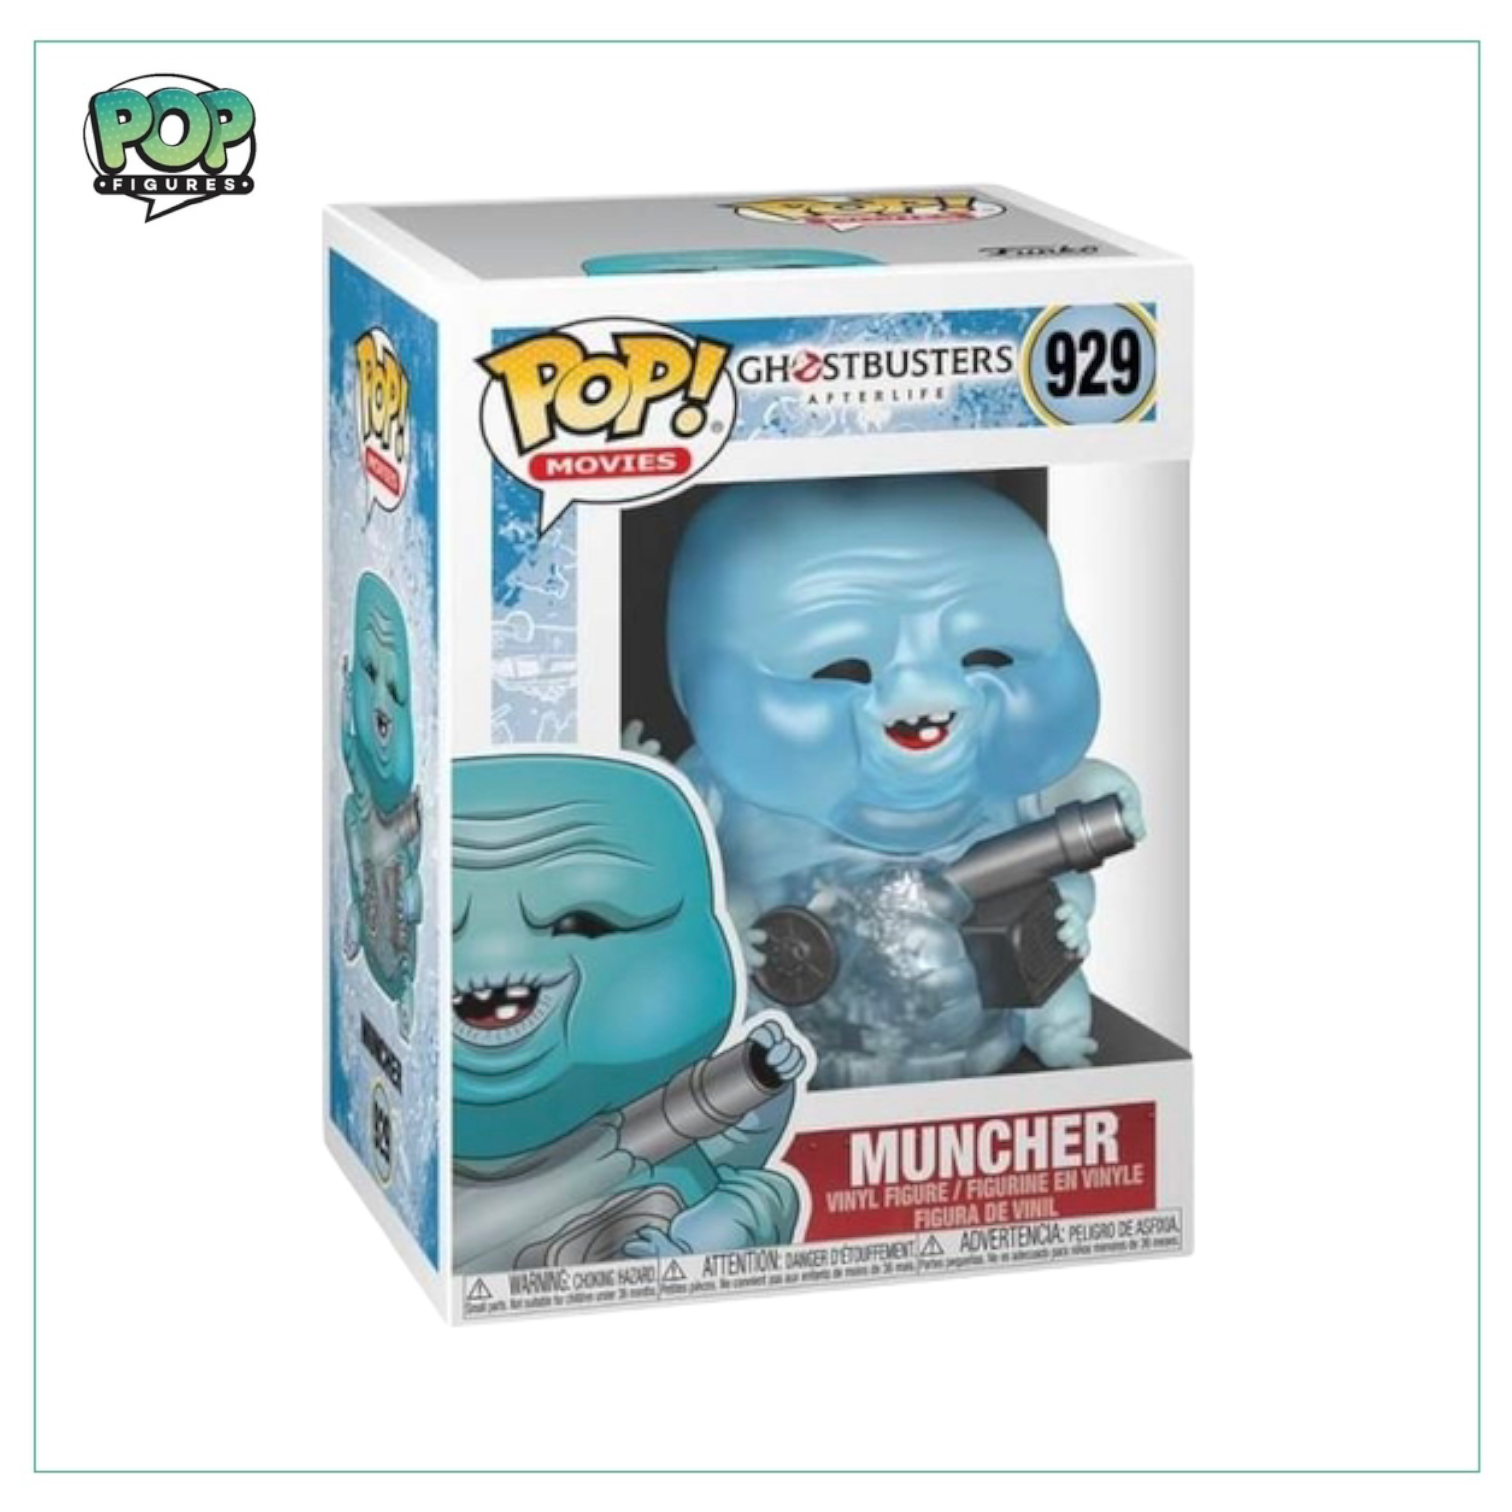 Muncher #929 Funko Pop! Ghostbusters: Afterlife